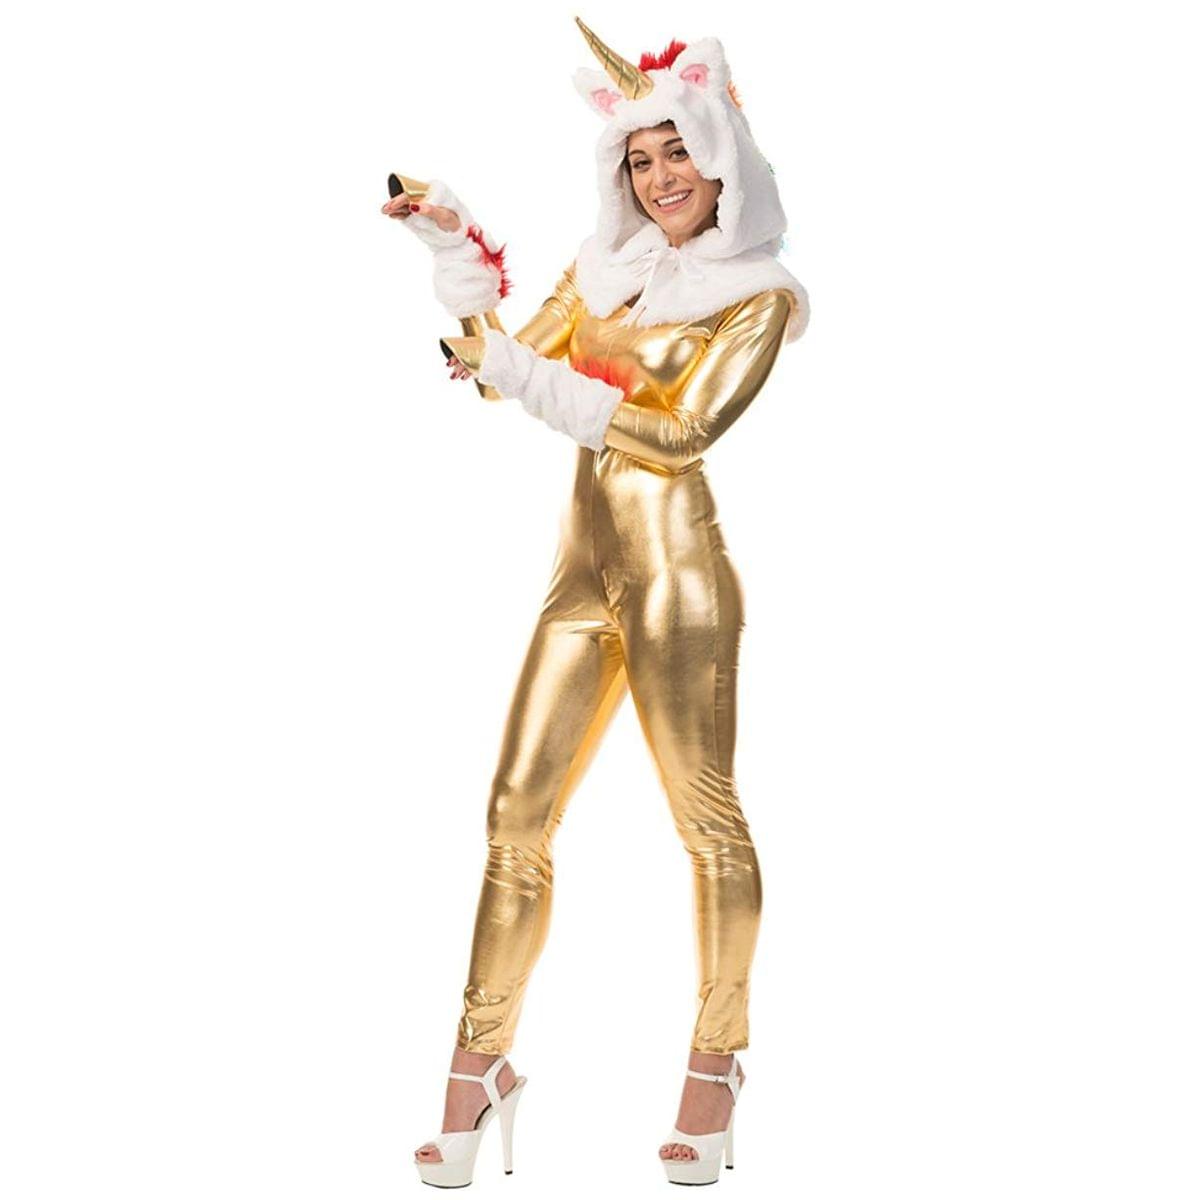 Unicorn Hood And Tail Adult Costume Kit, One Size